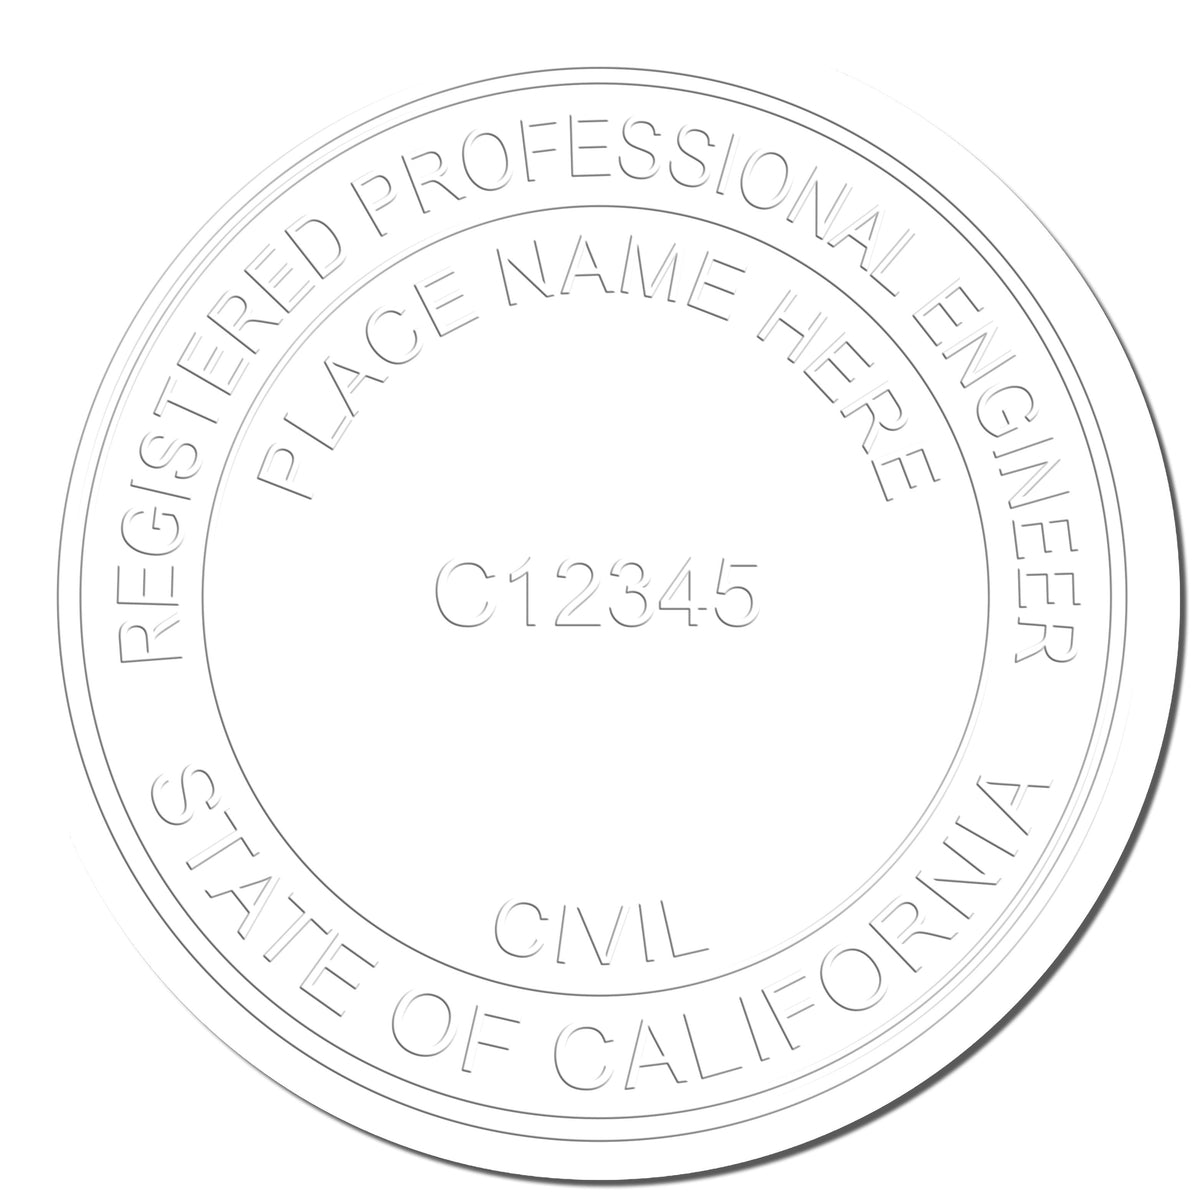 A photograph of the Handheld California Professional Engineer Embosser stamp impression reveals a vivid, professional image of the on paper.